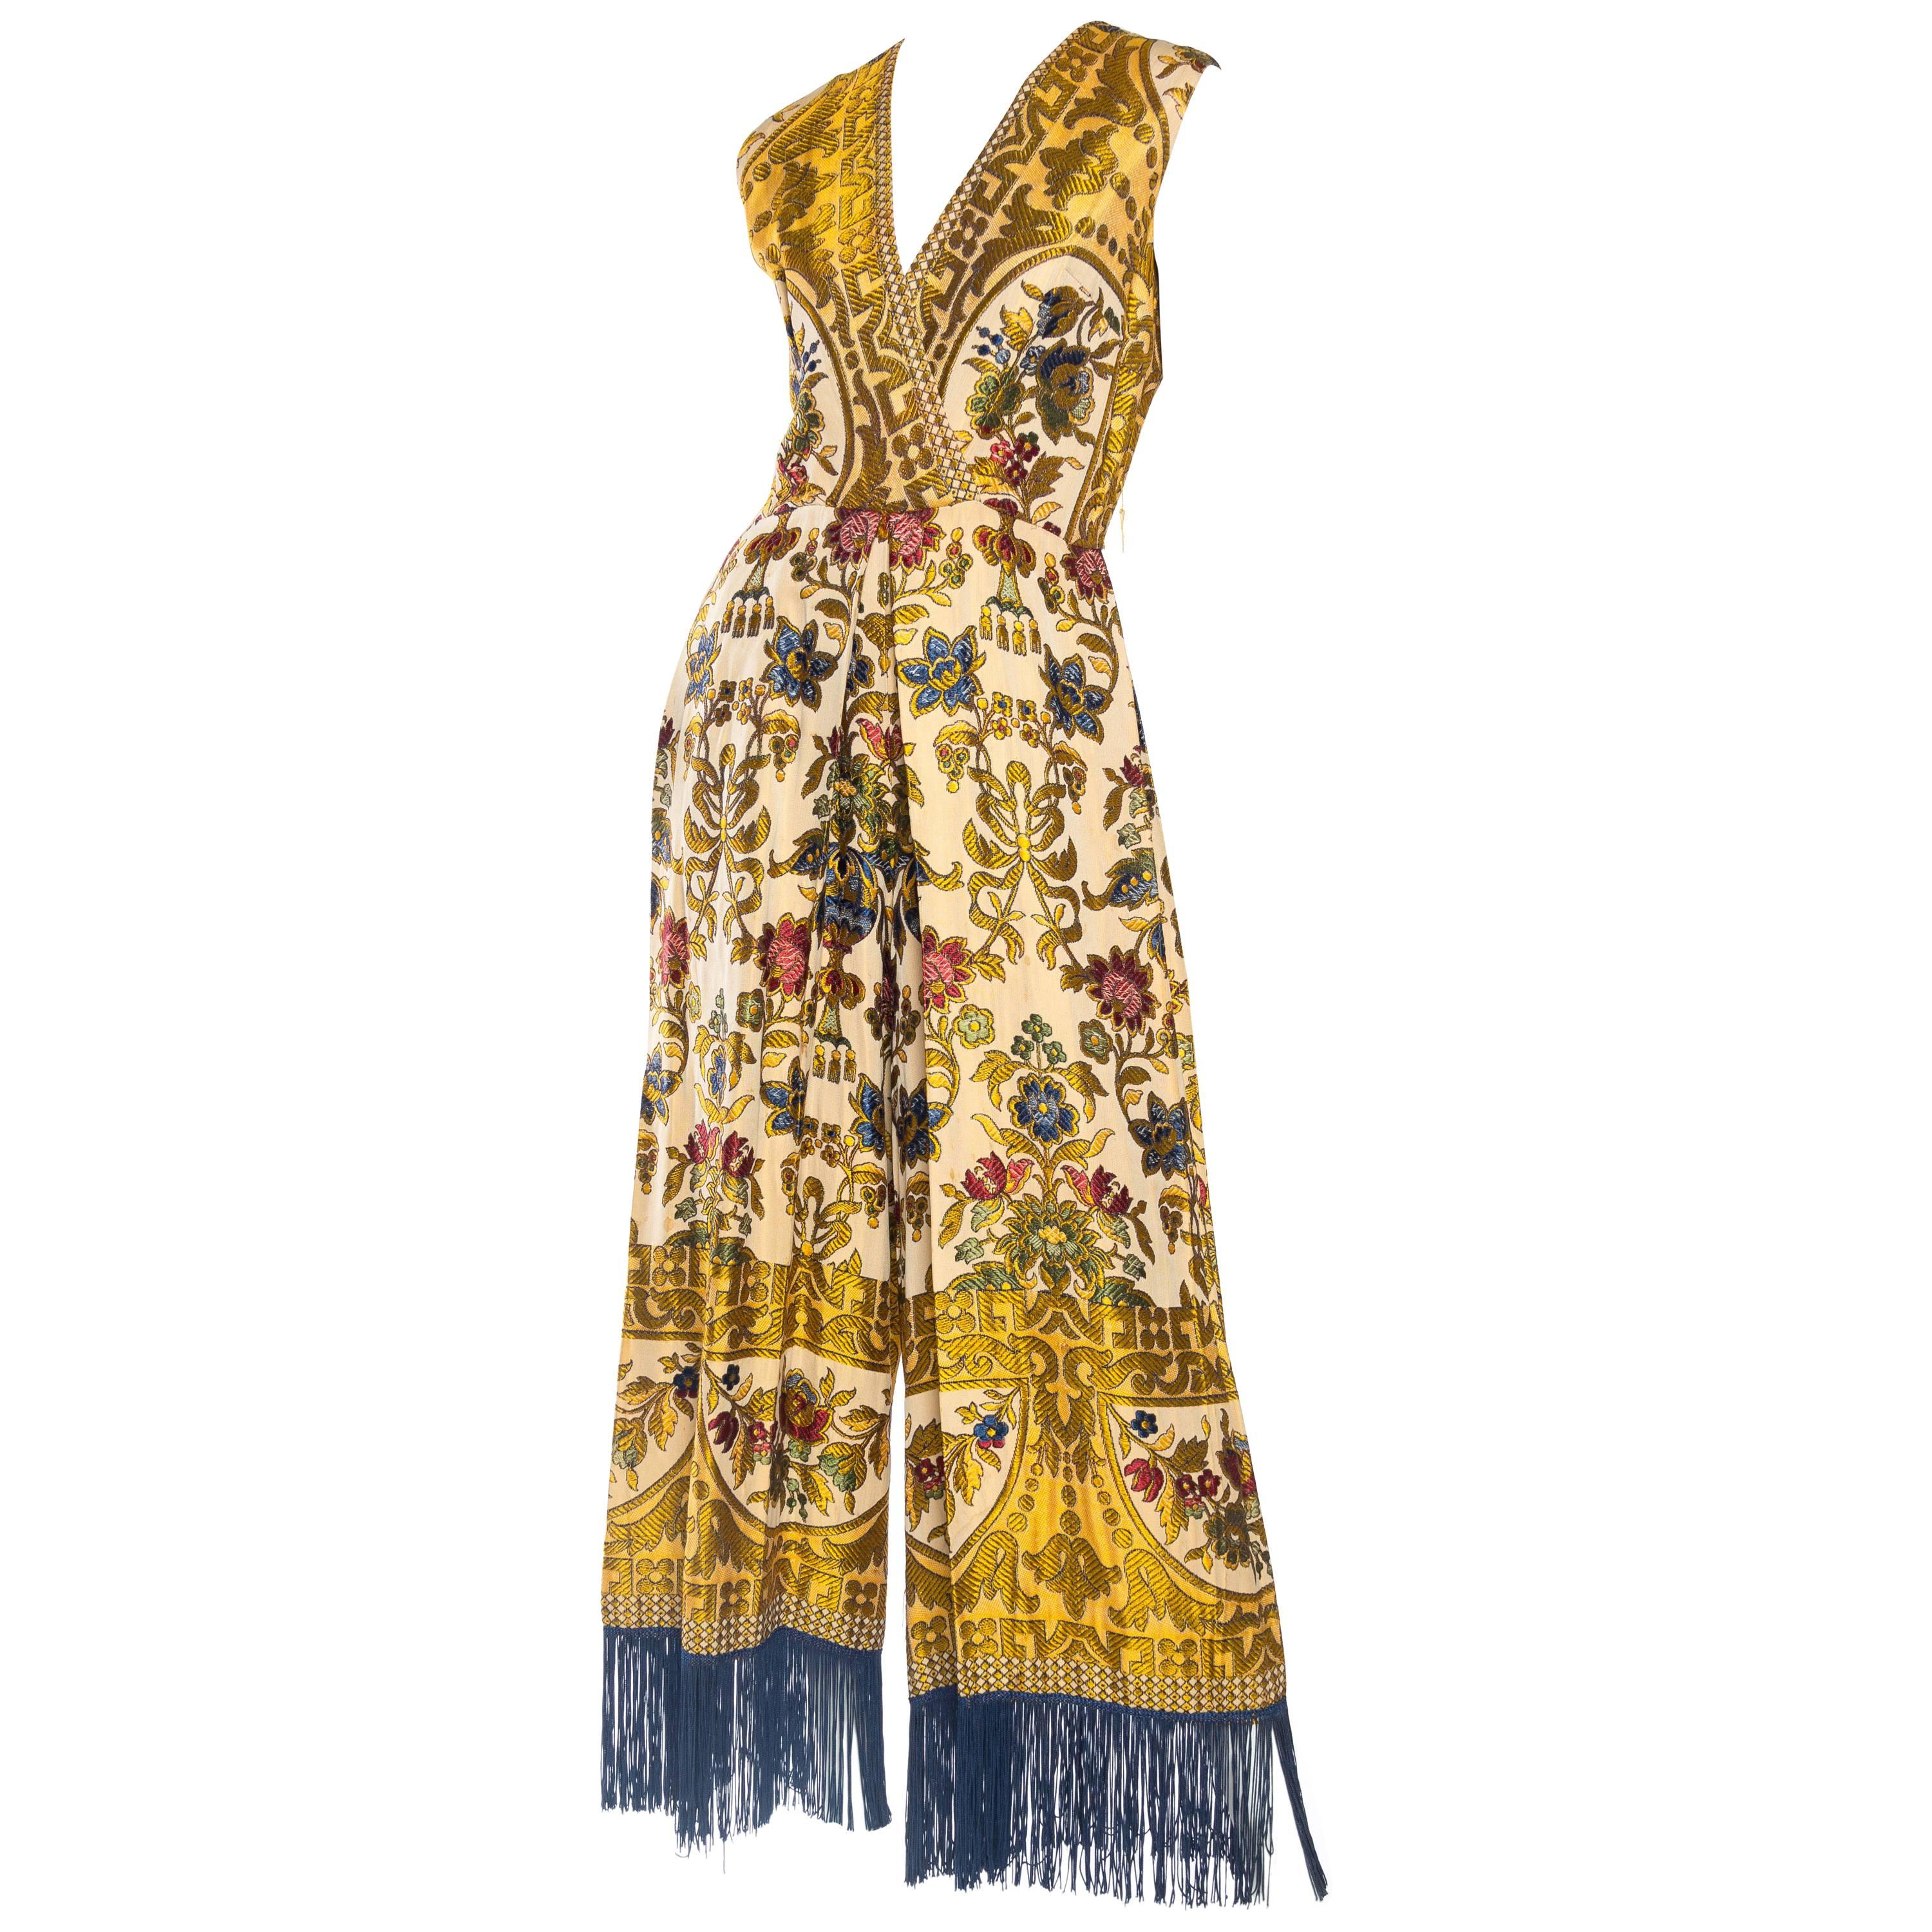 Fabulous 1960s Middle Eastern Textile Jumpsuit with Fringe